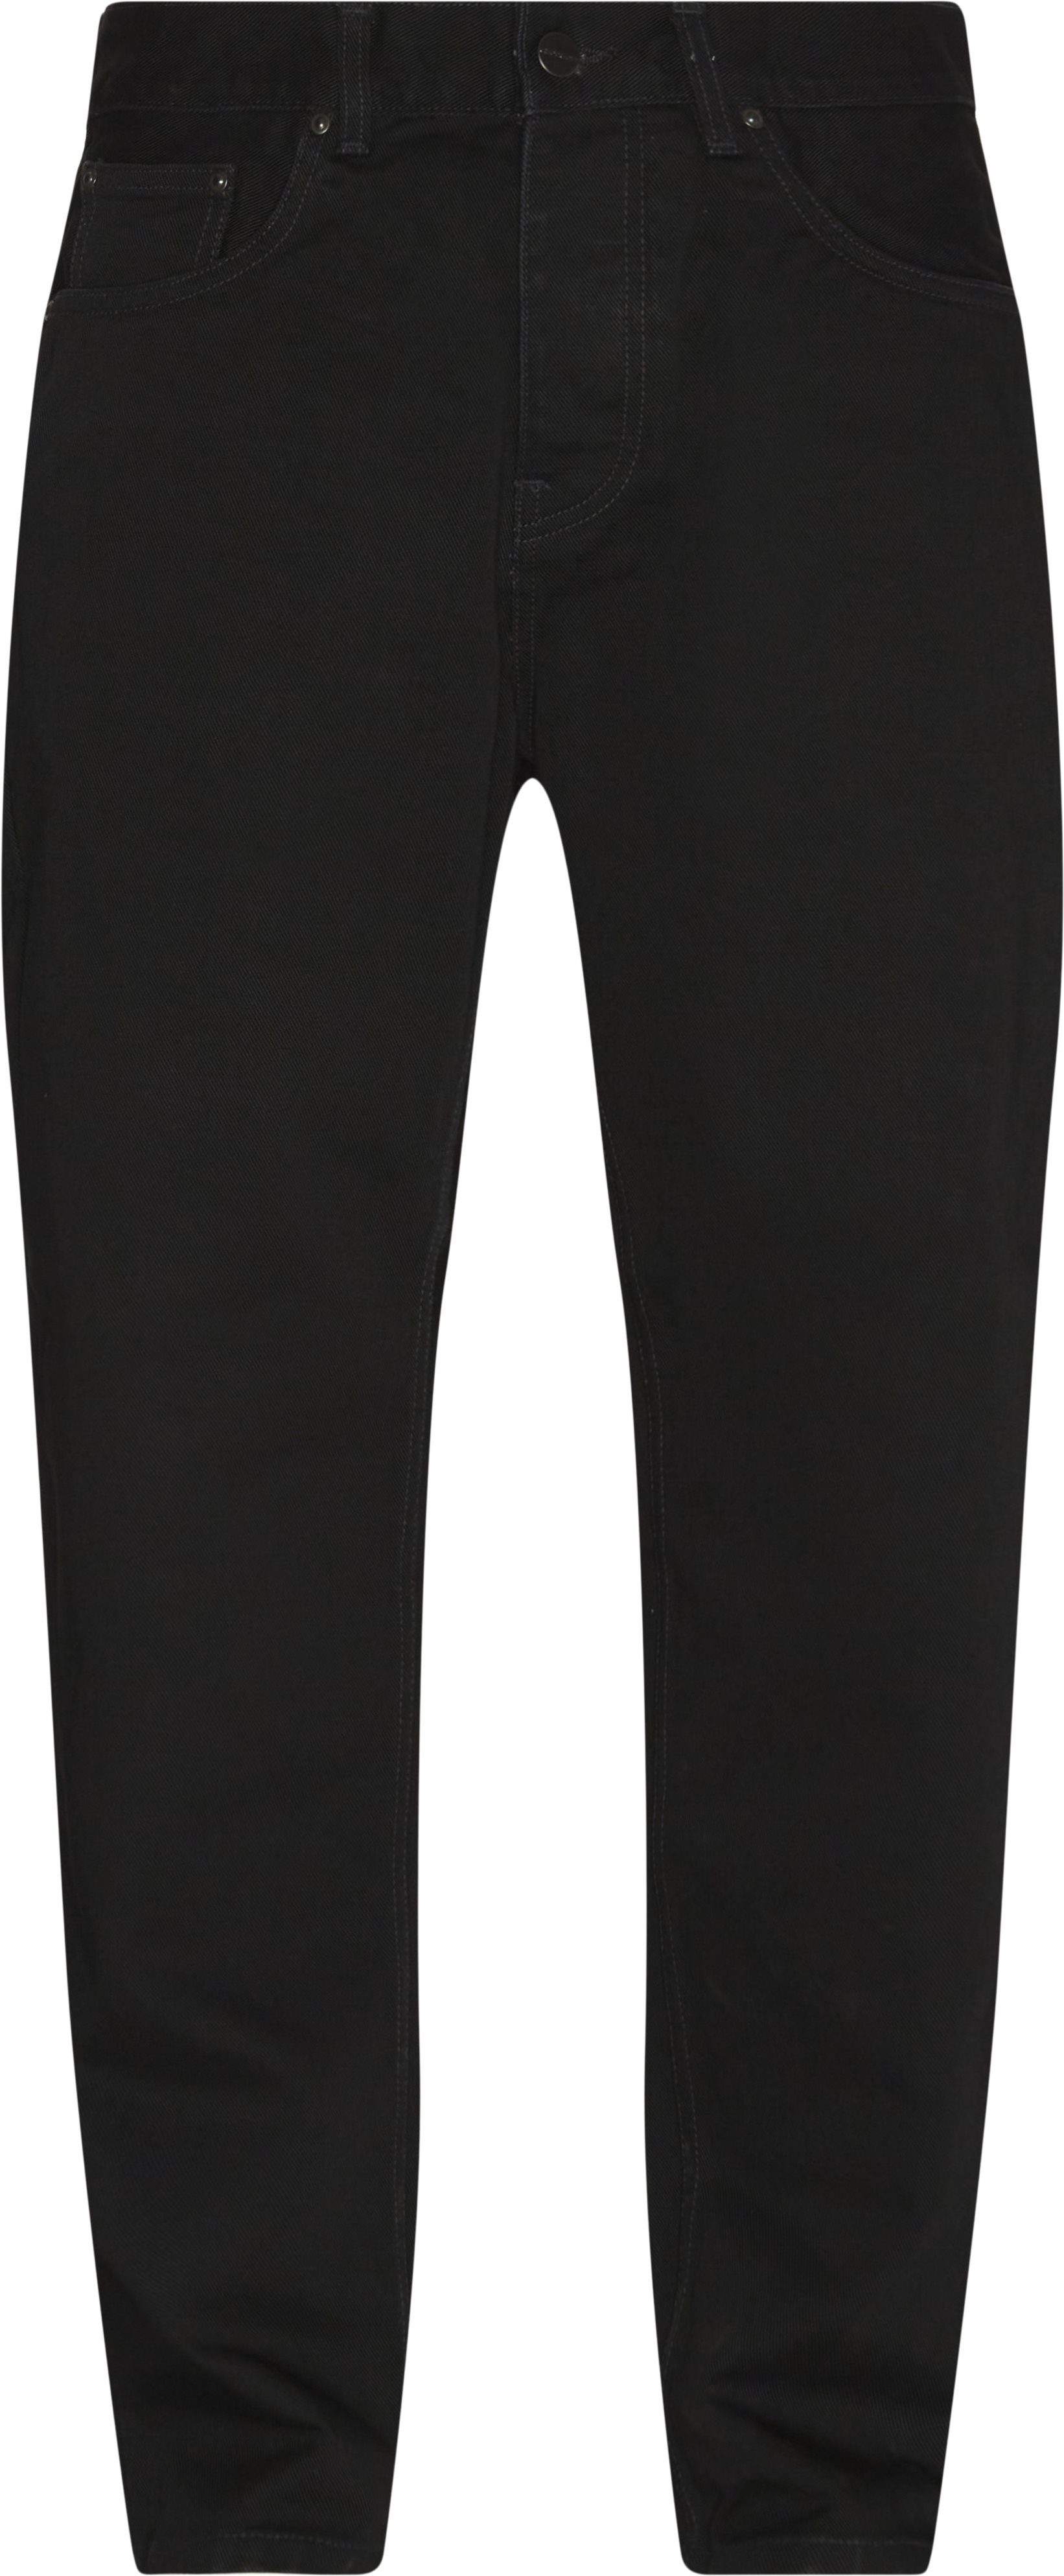 Newel Jeans - Jeans - Tapered fit - Black